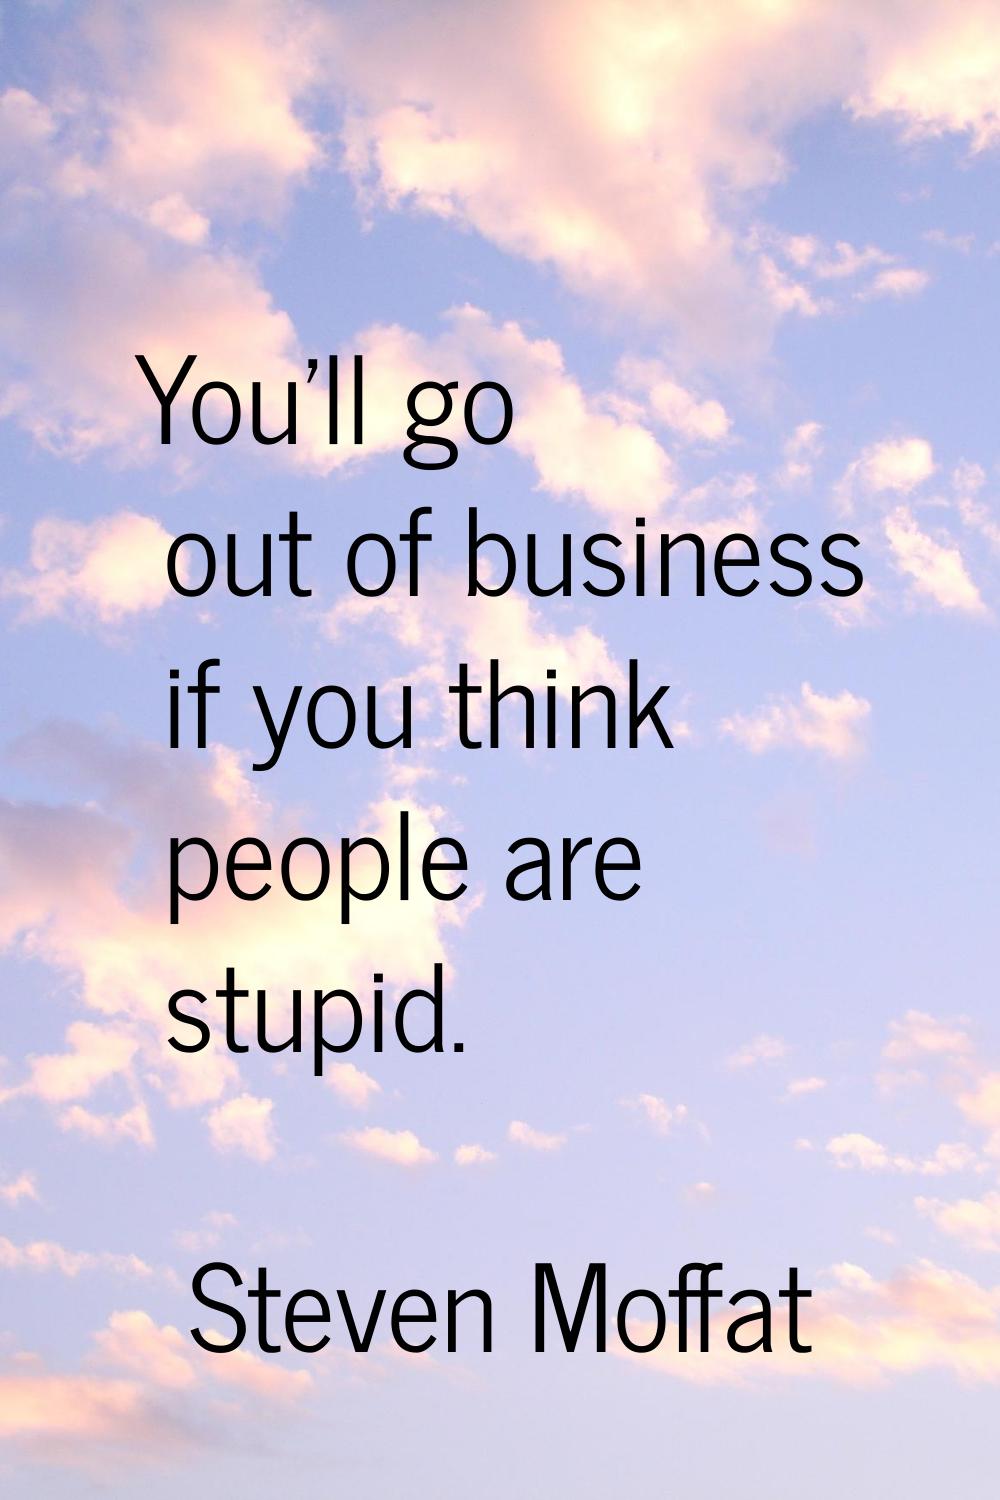 You'll go out of business if you think people are stupid.